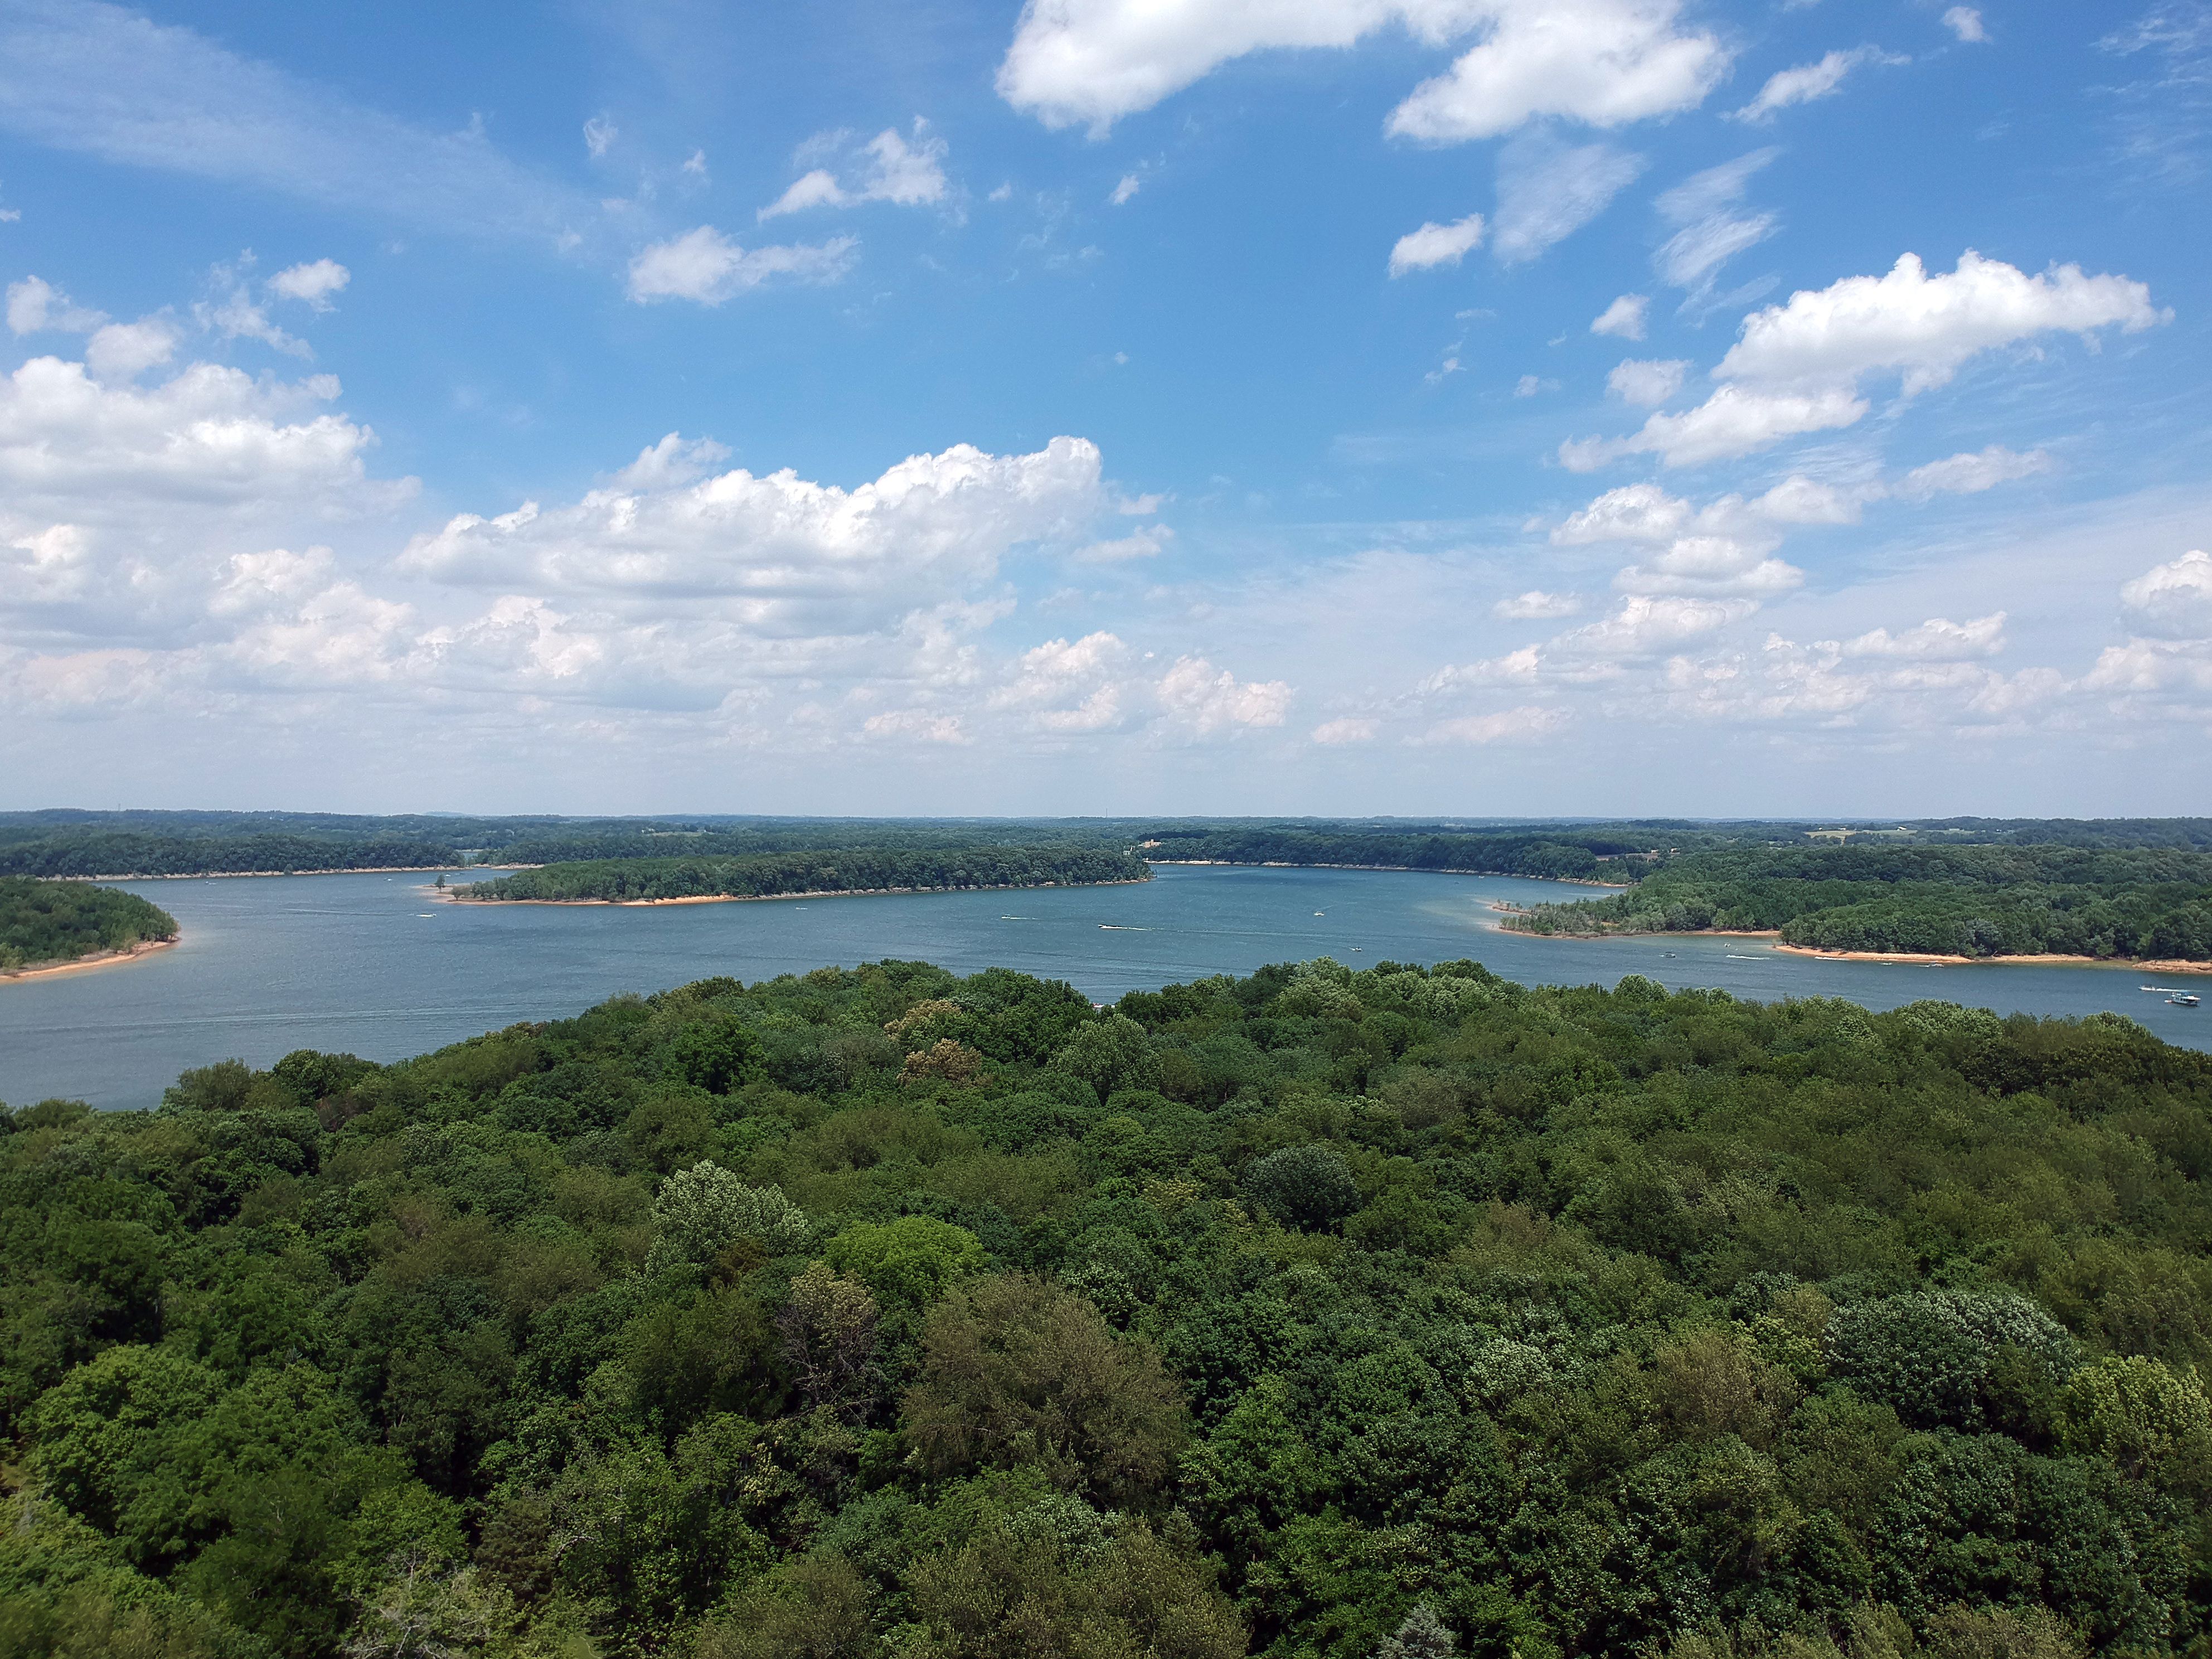 Barren River Lake surrounded by lush greenery